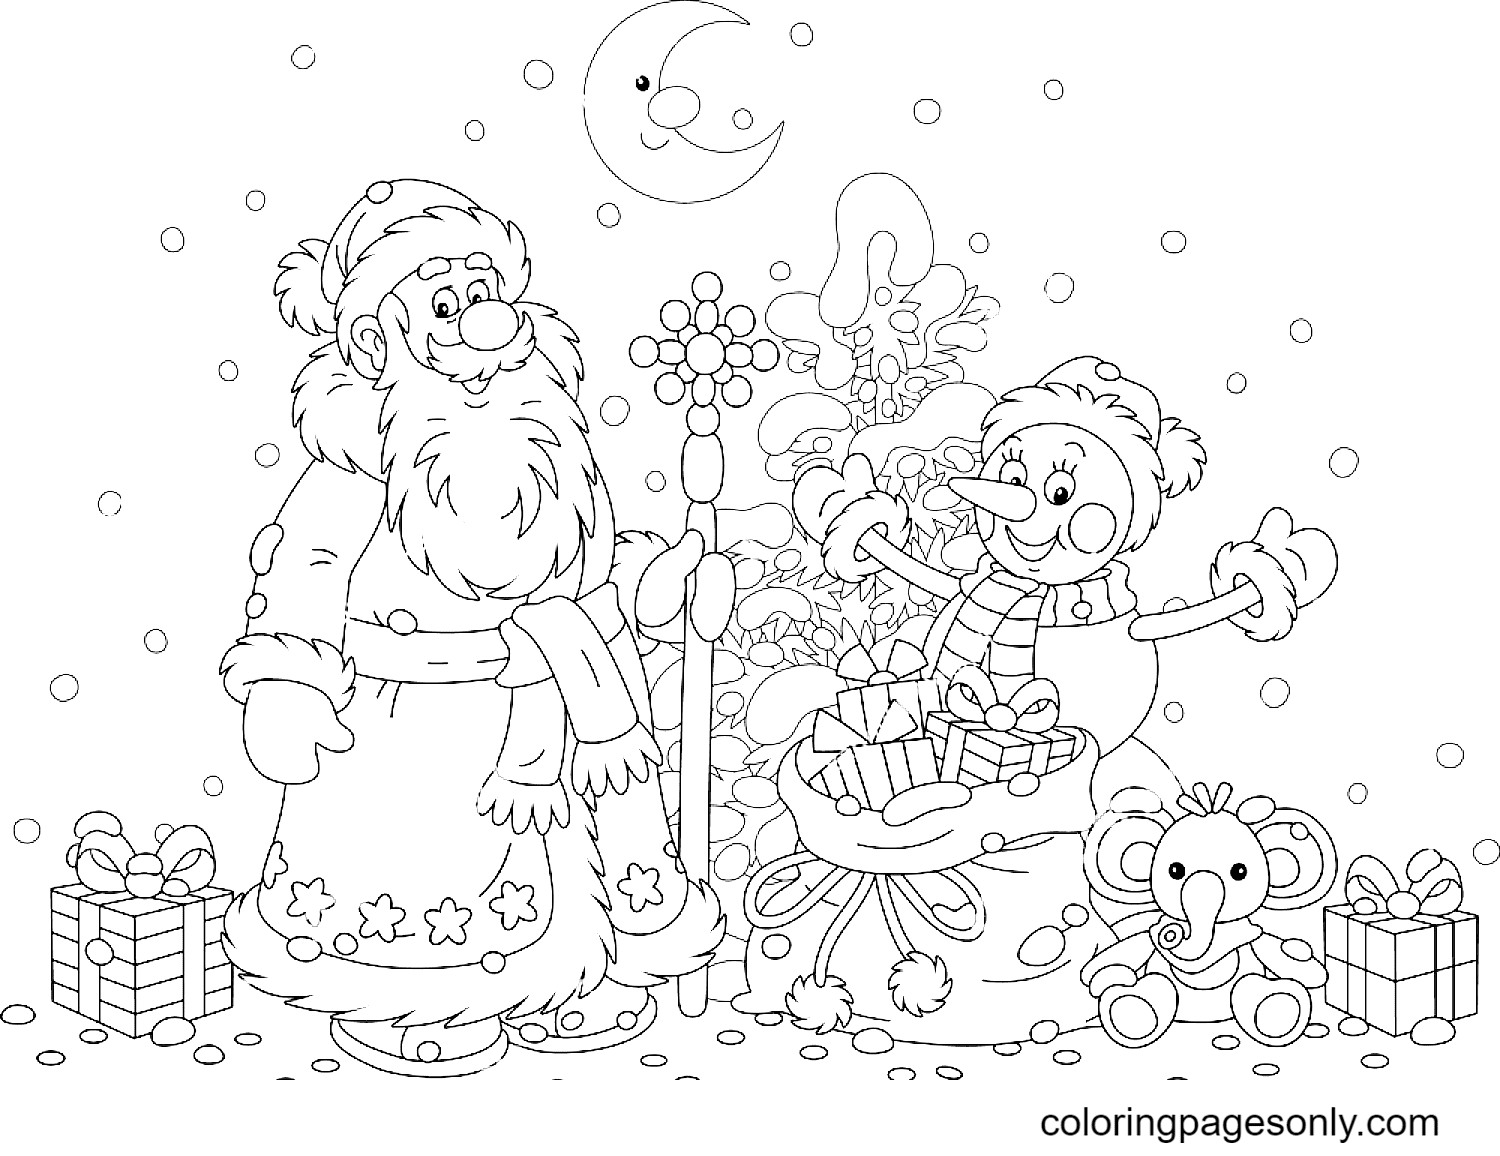 Santa Claus, a Magic Gift Bag, snowman with a Snowy Christmas tree Coloring Page